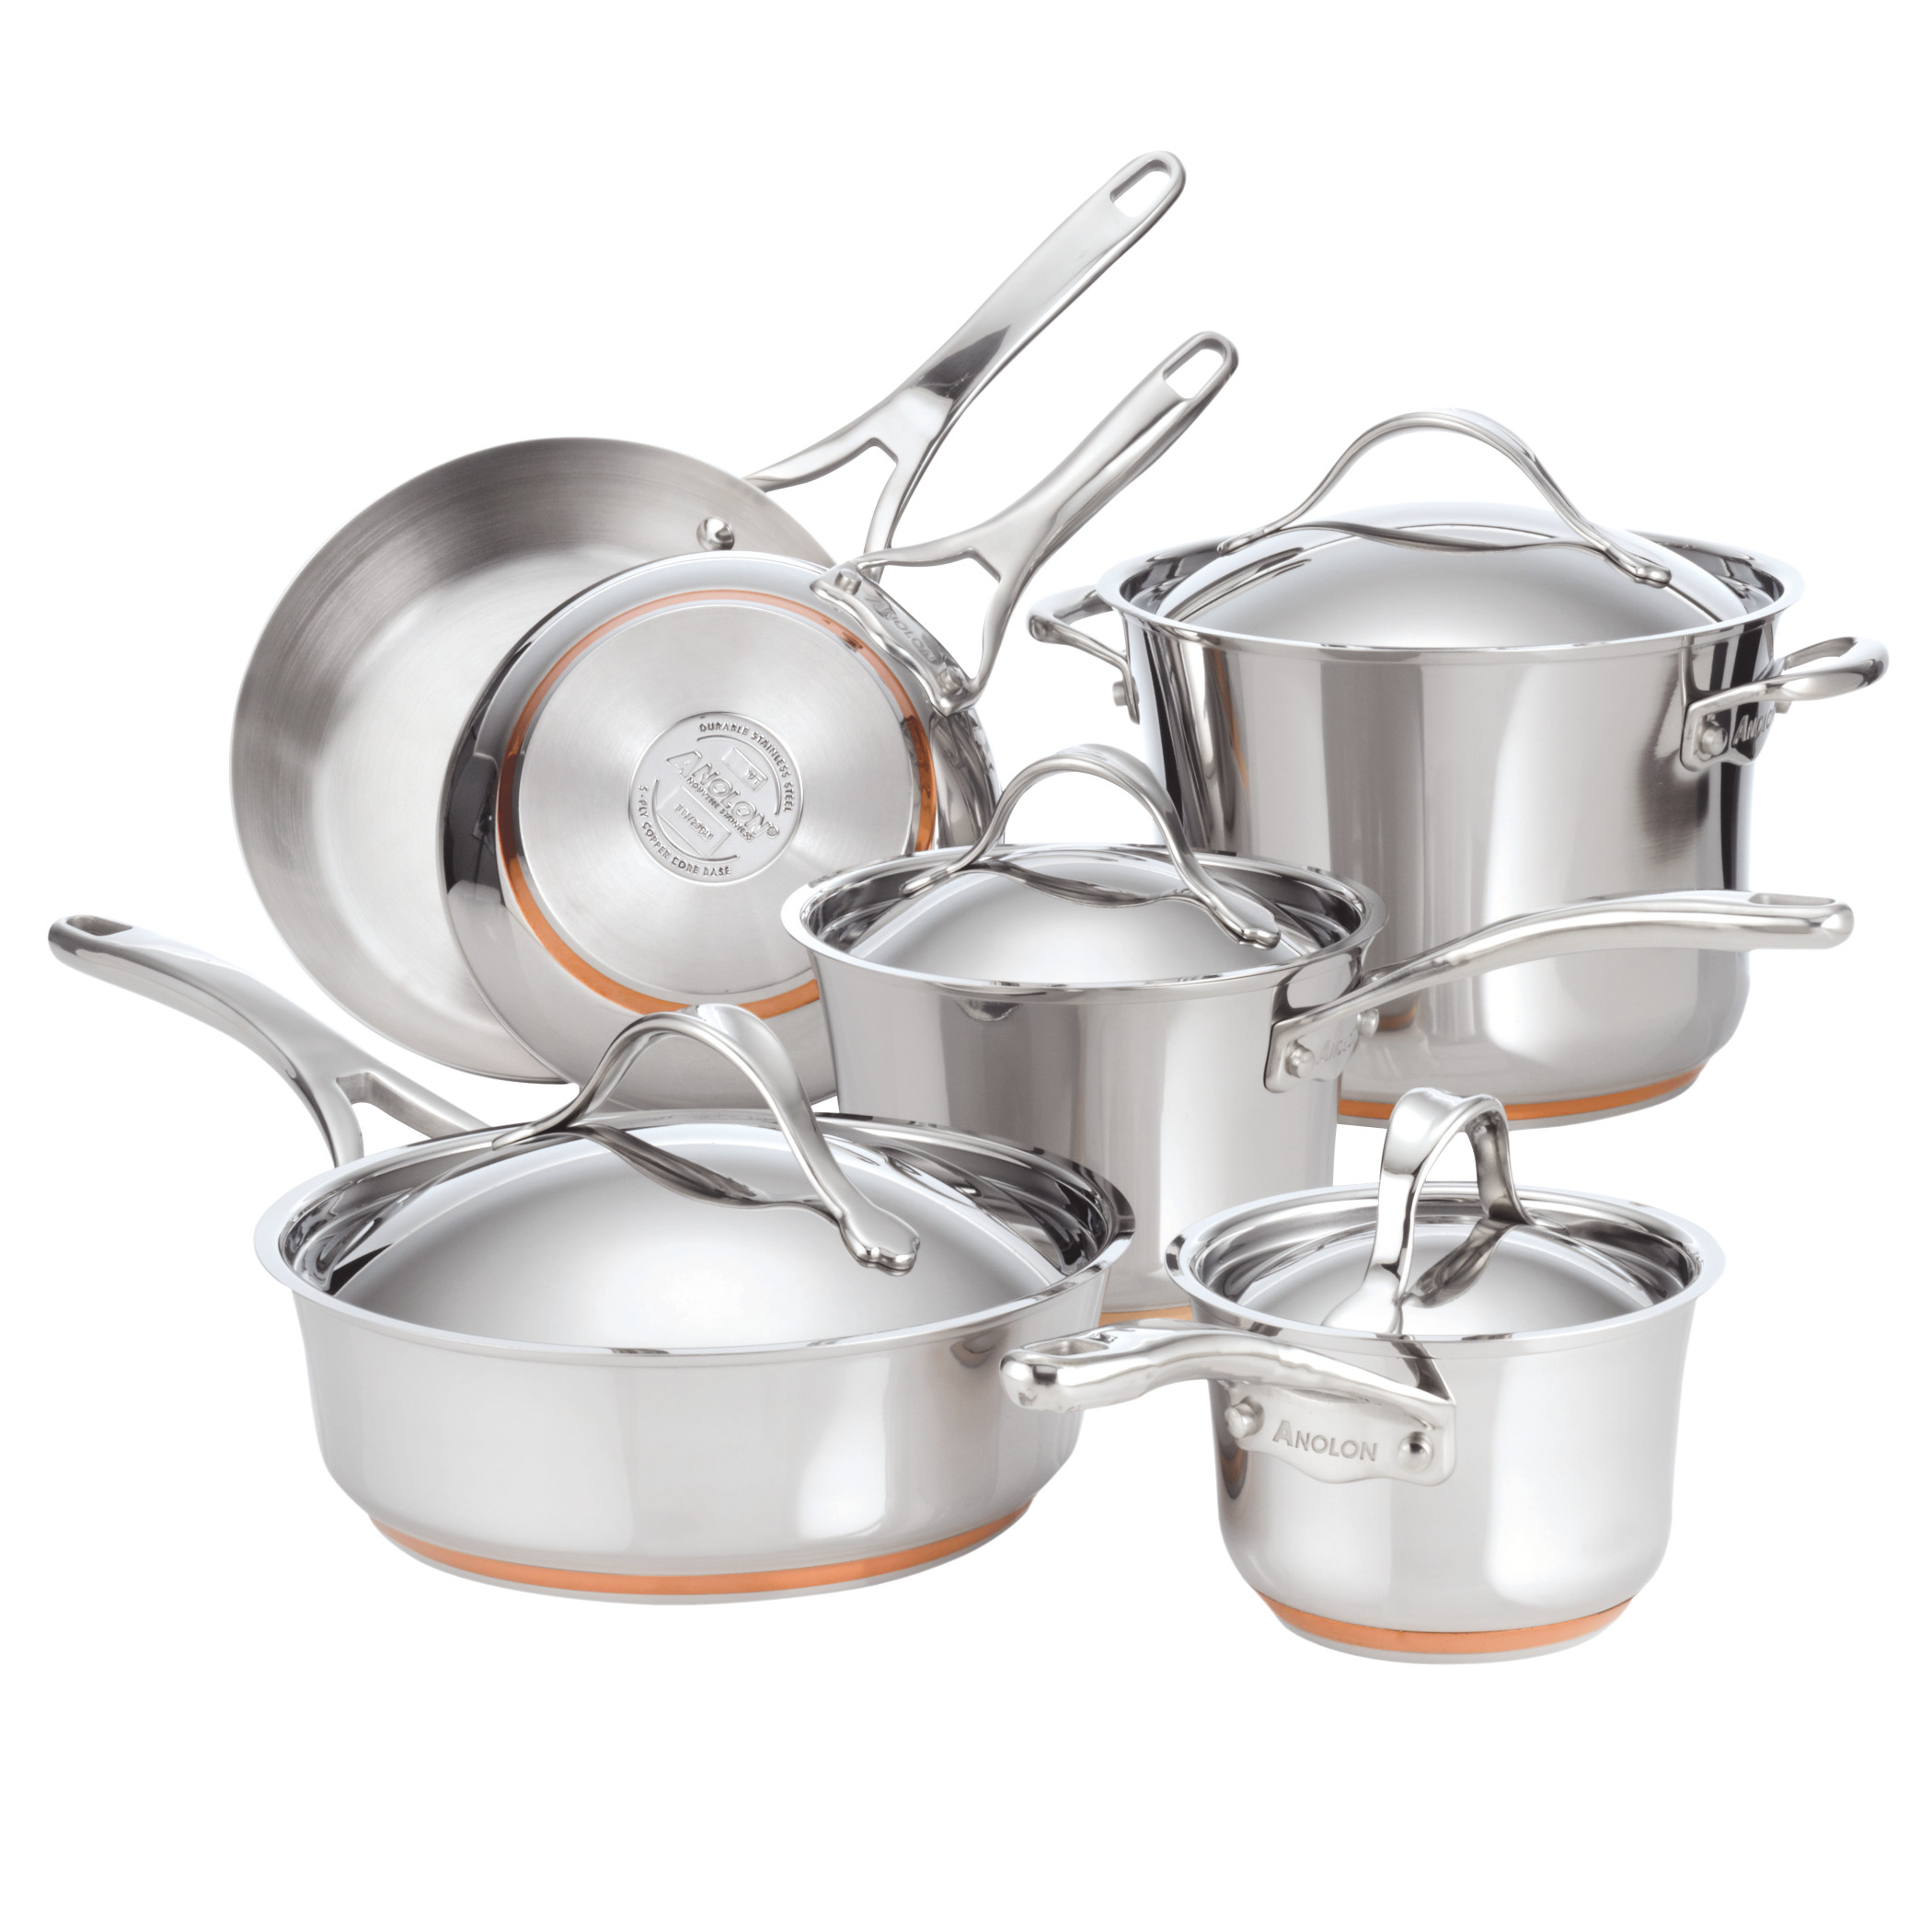 Anolon Nouvelle Copper Stainless Steel Pots and Pans Pots and Pans, 10-Piece, Silver - image 1 of 10